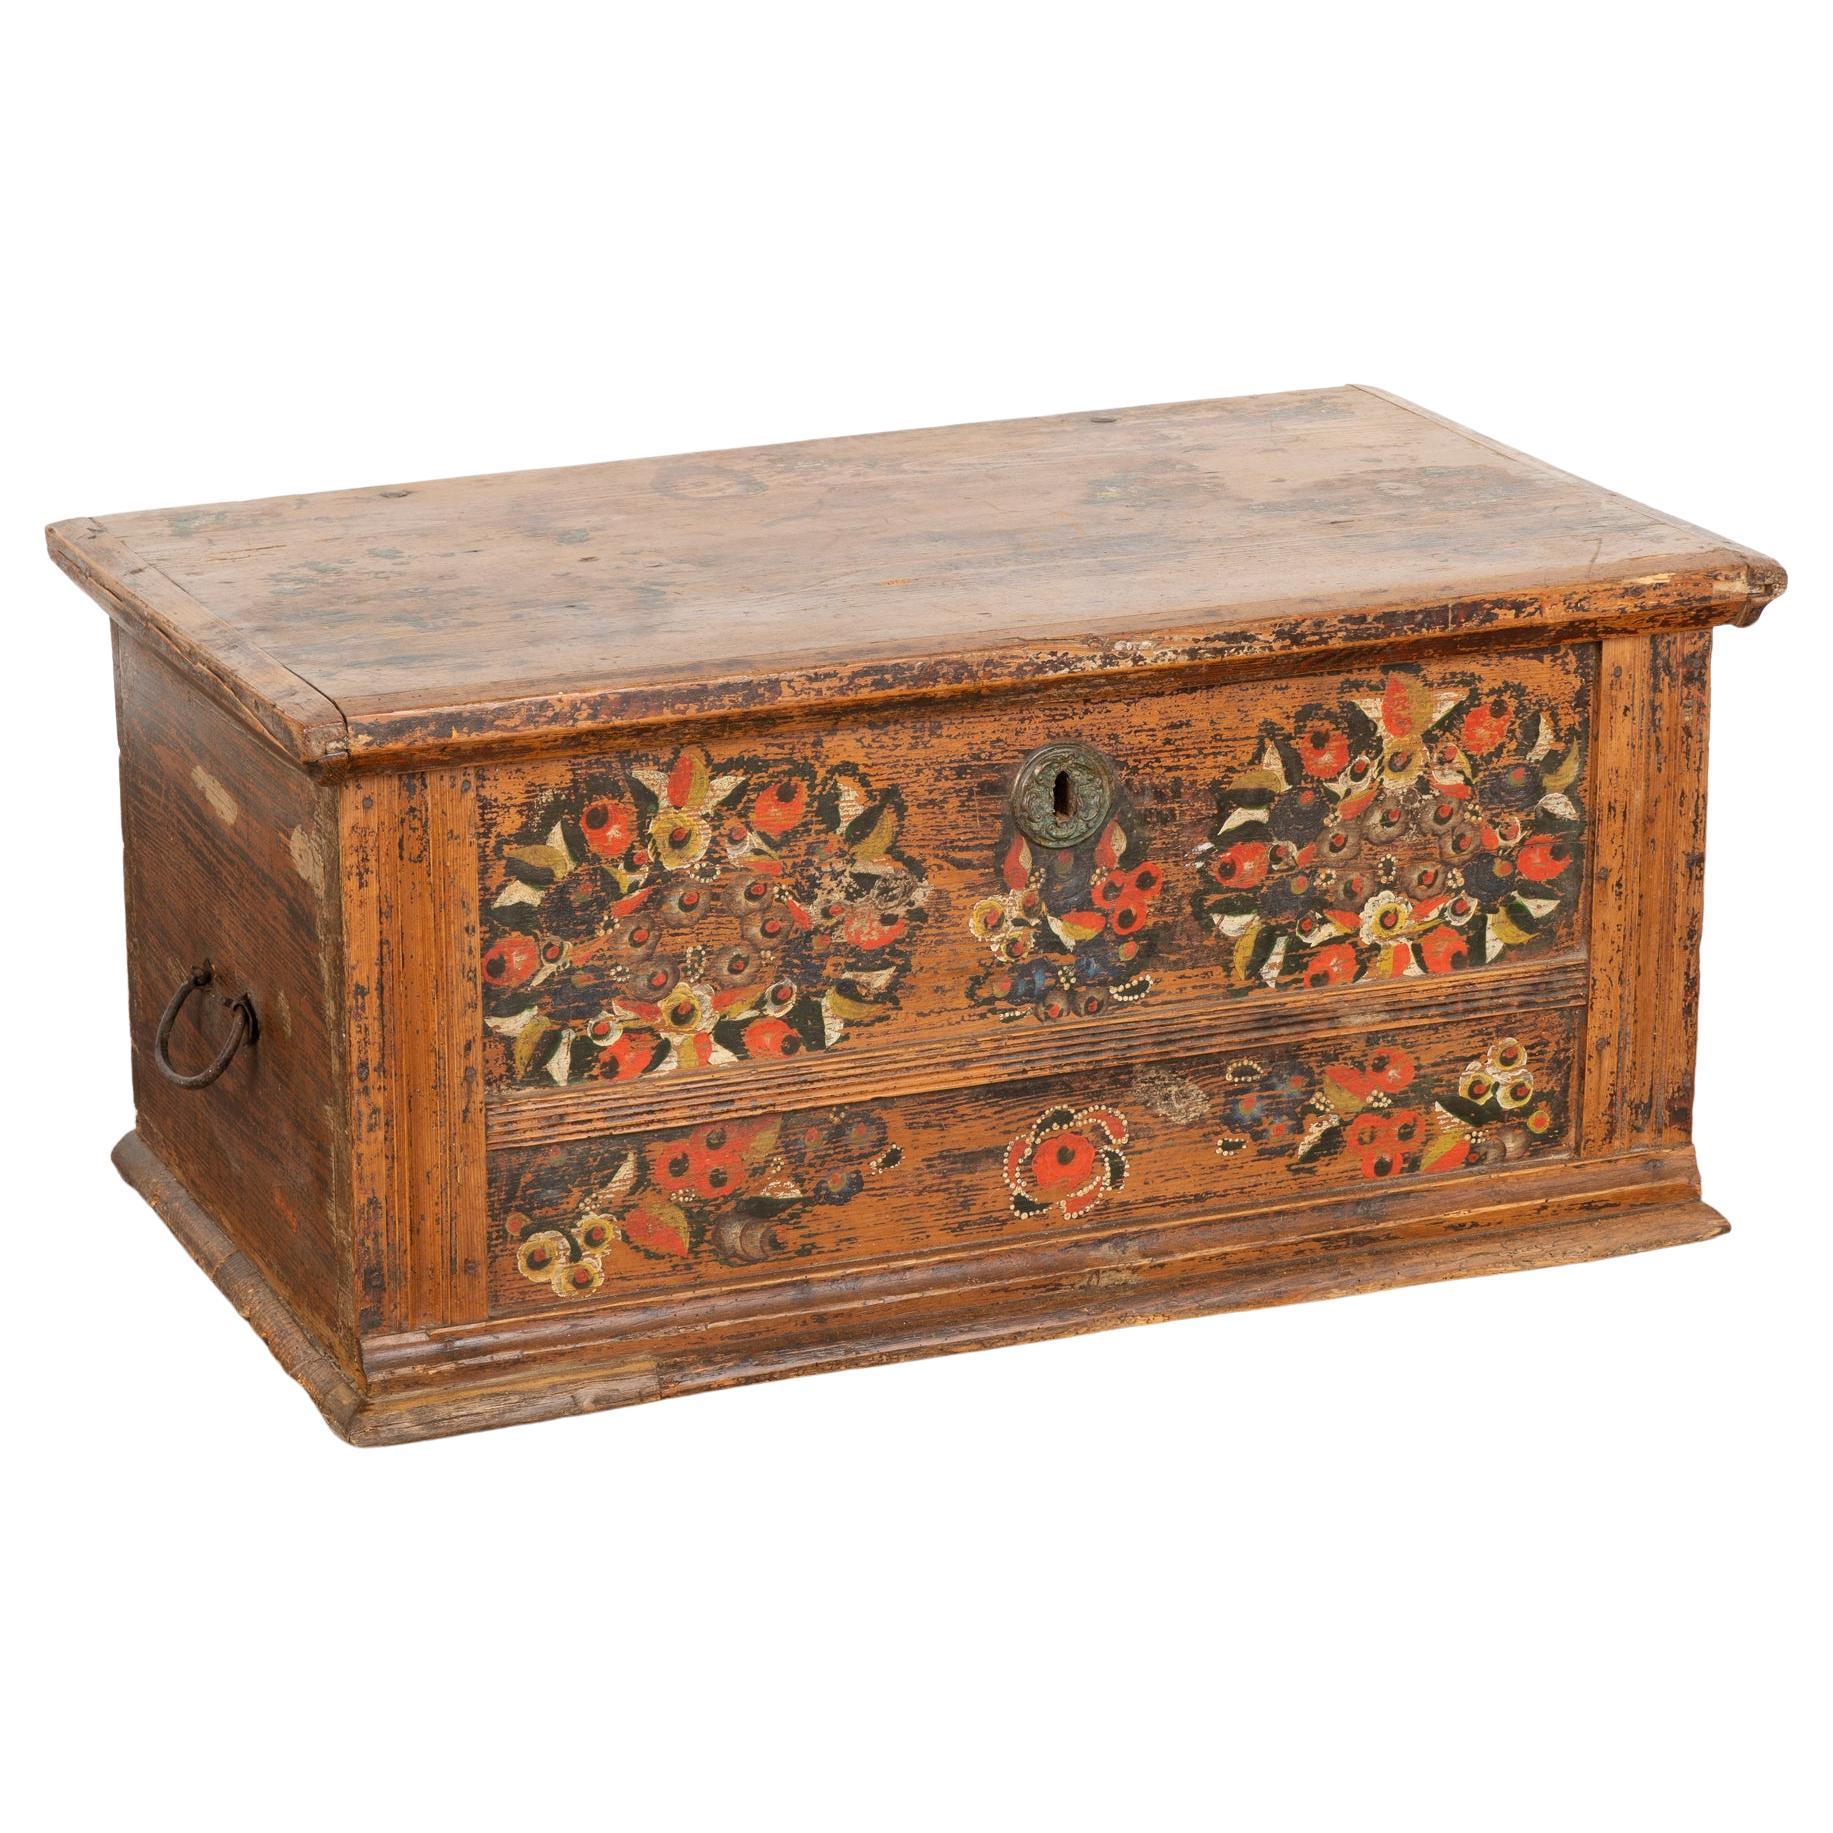 Original Hand Painted Flat Top Pine Trunk With Flowers, Hungary circa 1880